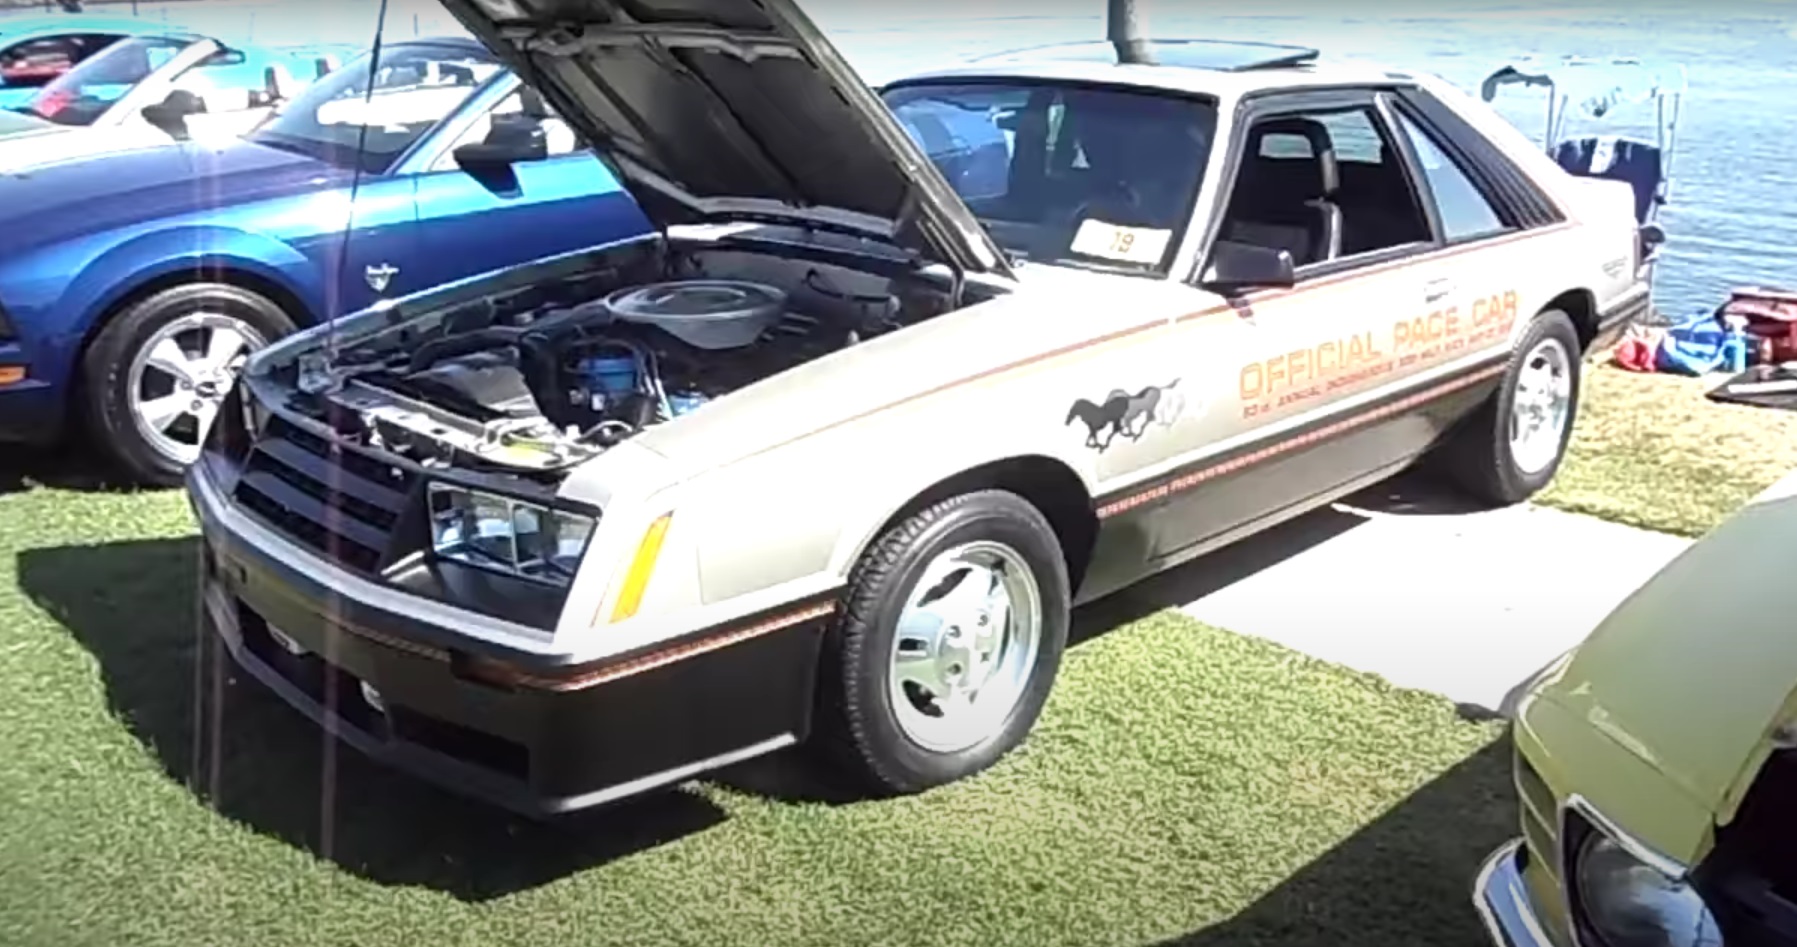 Video: 1979 Ford Mustang Indianapolis Pace Car Quick Tour